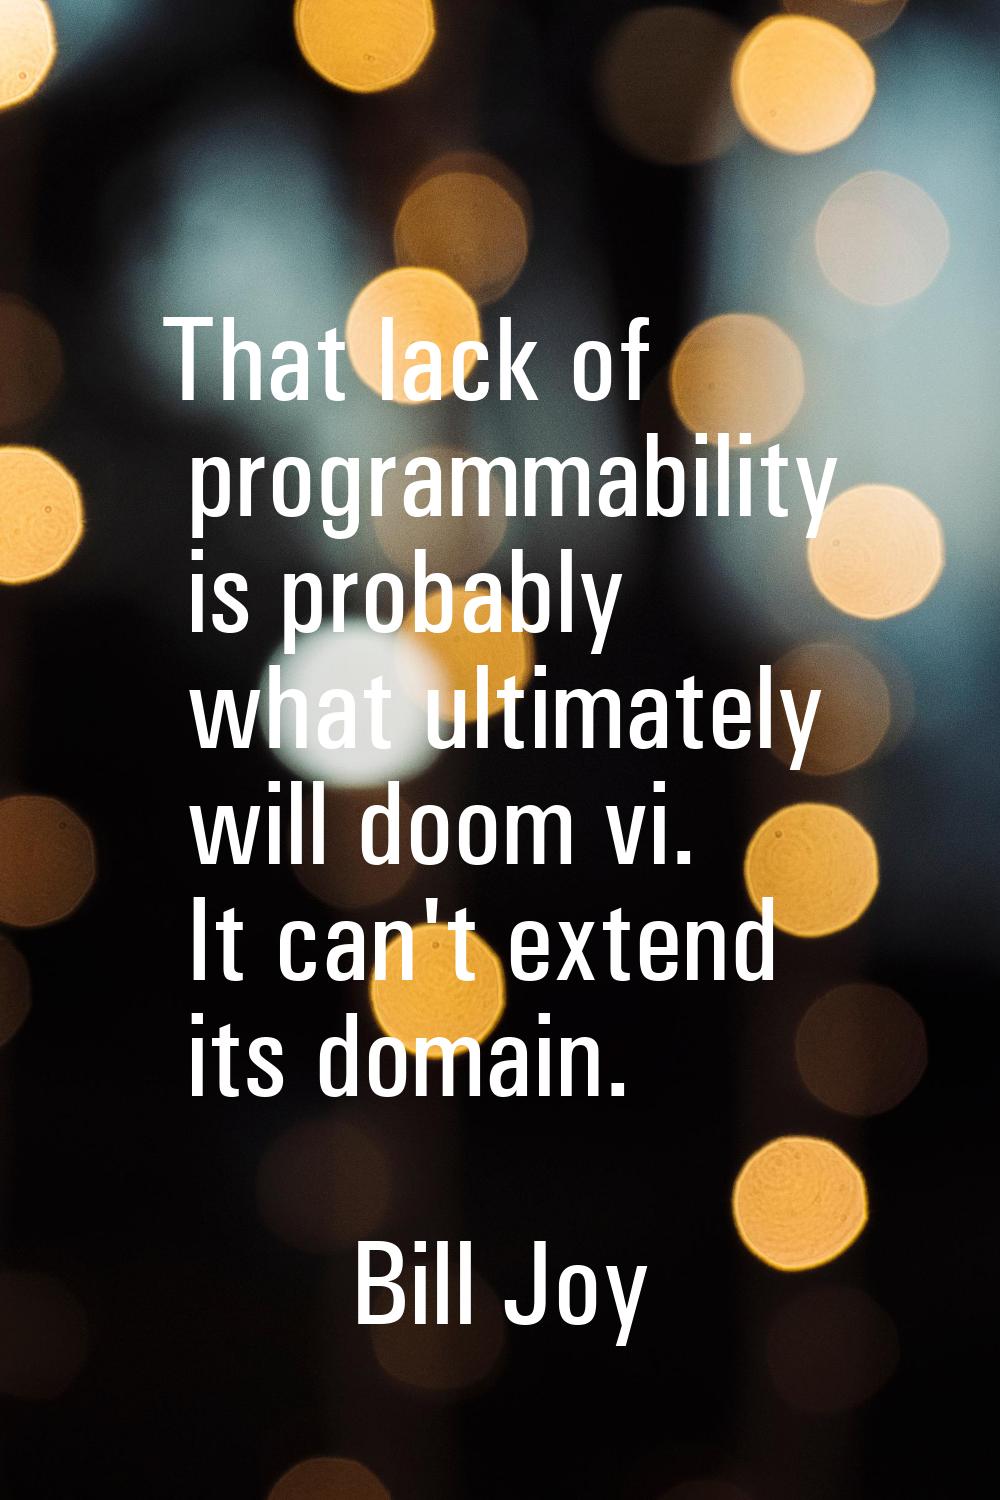 That lack of programmability is probably what ultimately will doom vi. It can't extend its domain.